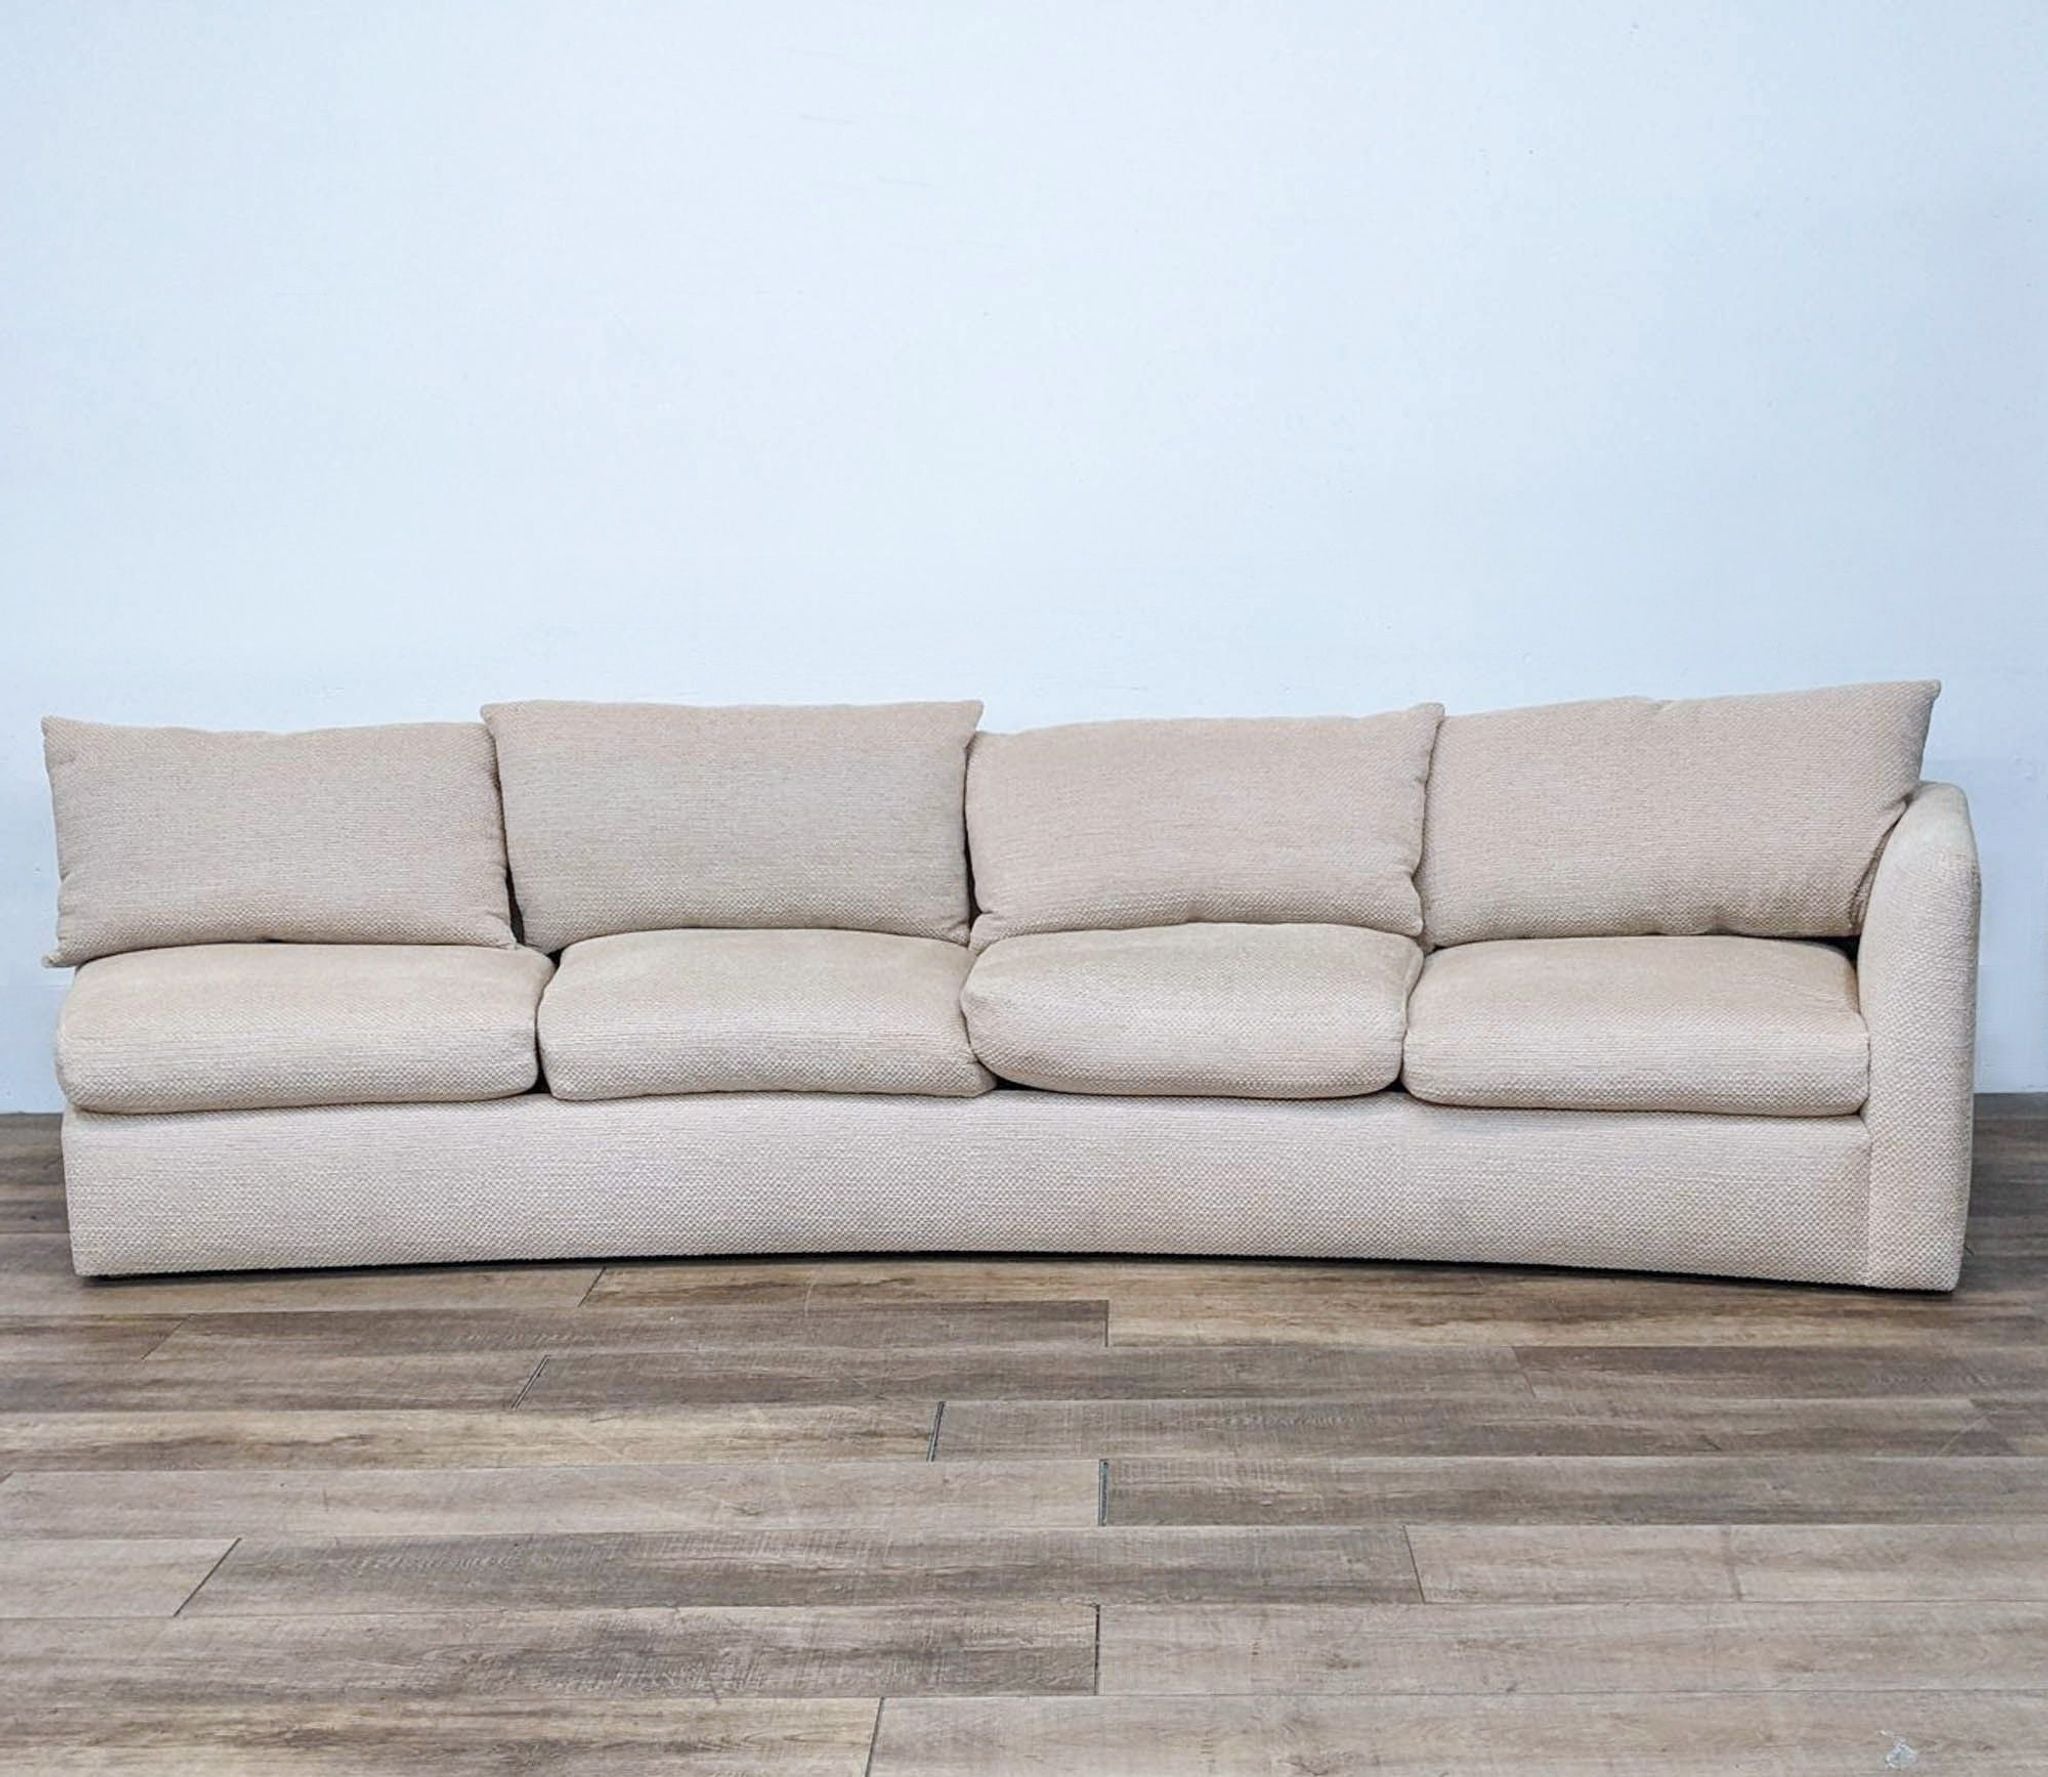 Large one-arm curved sectional sofa by Reperch, beige fabric, front view on wooden floor.